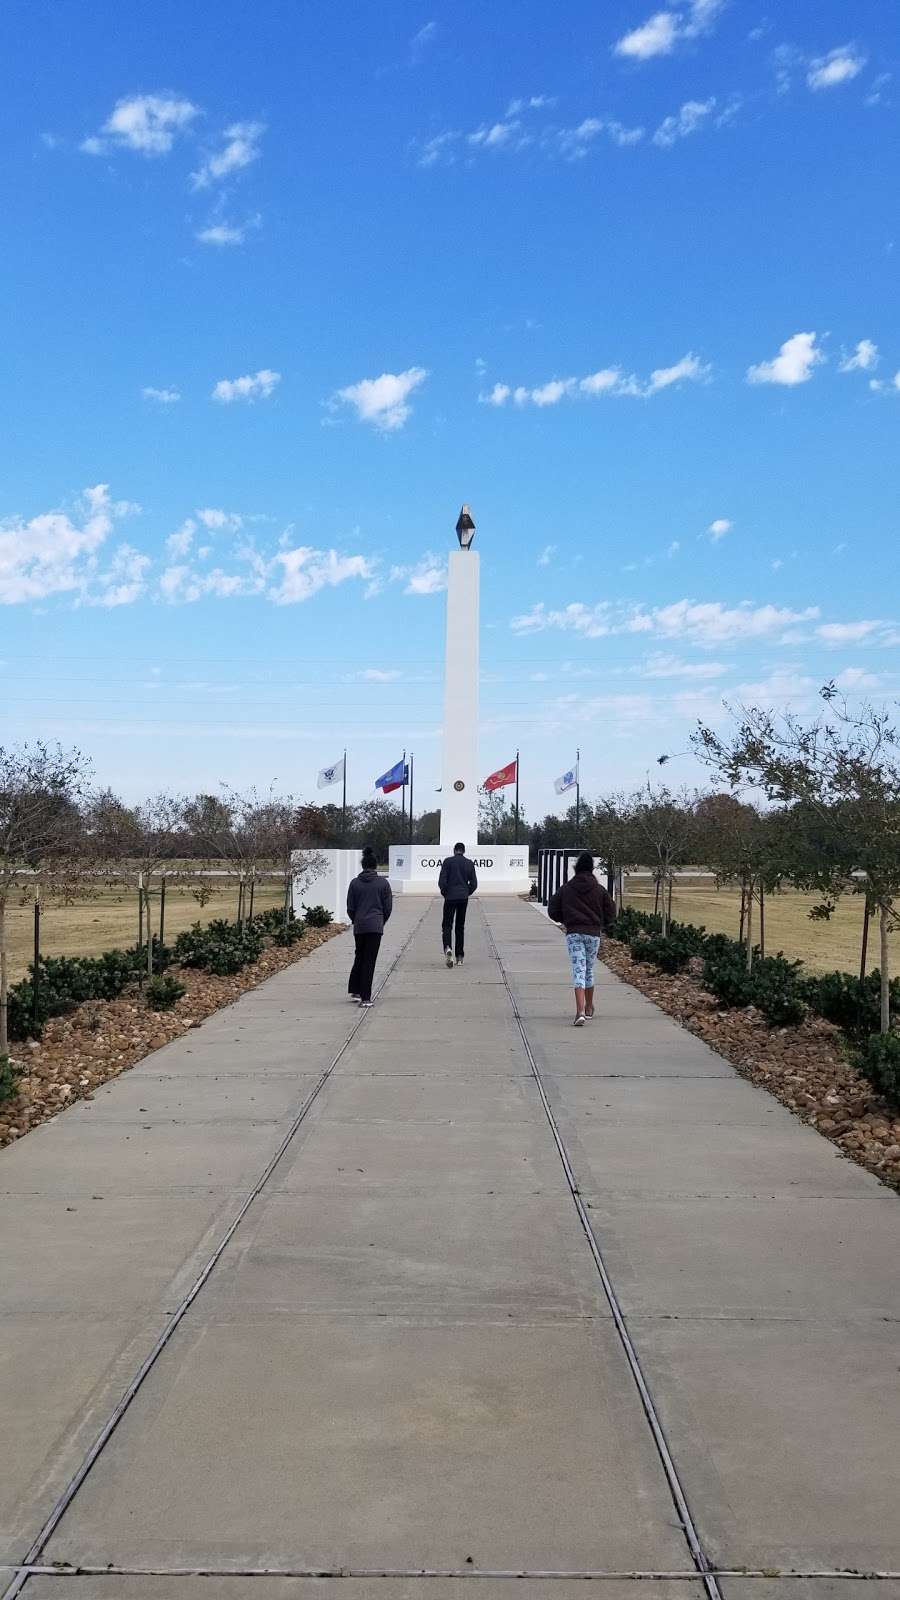 Armed Forces Memorial at Freedom Park | 18050 Westheimer Pkwy, Park Row, TX 77450, USA